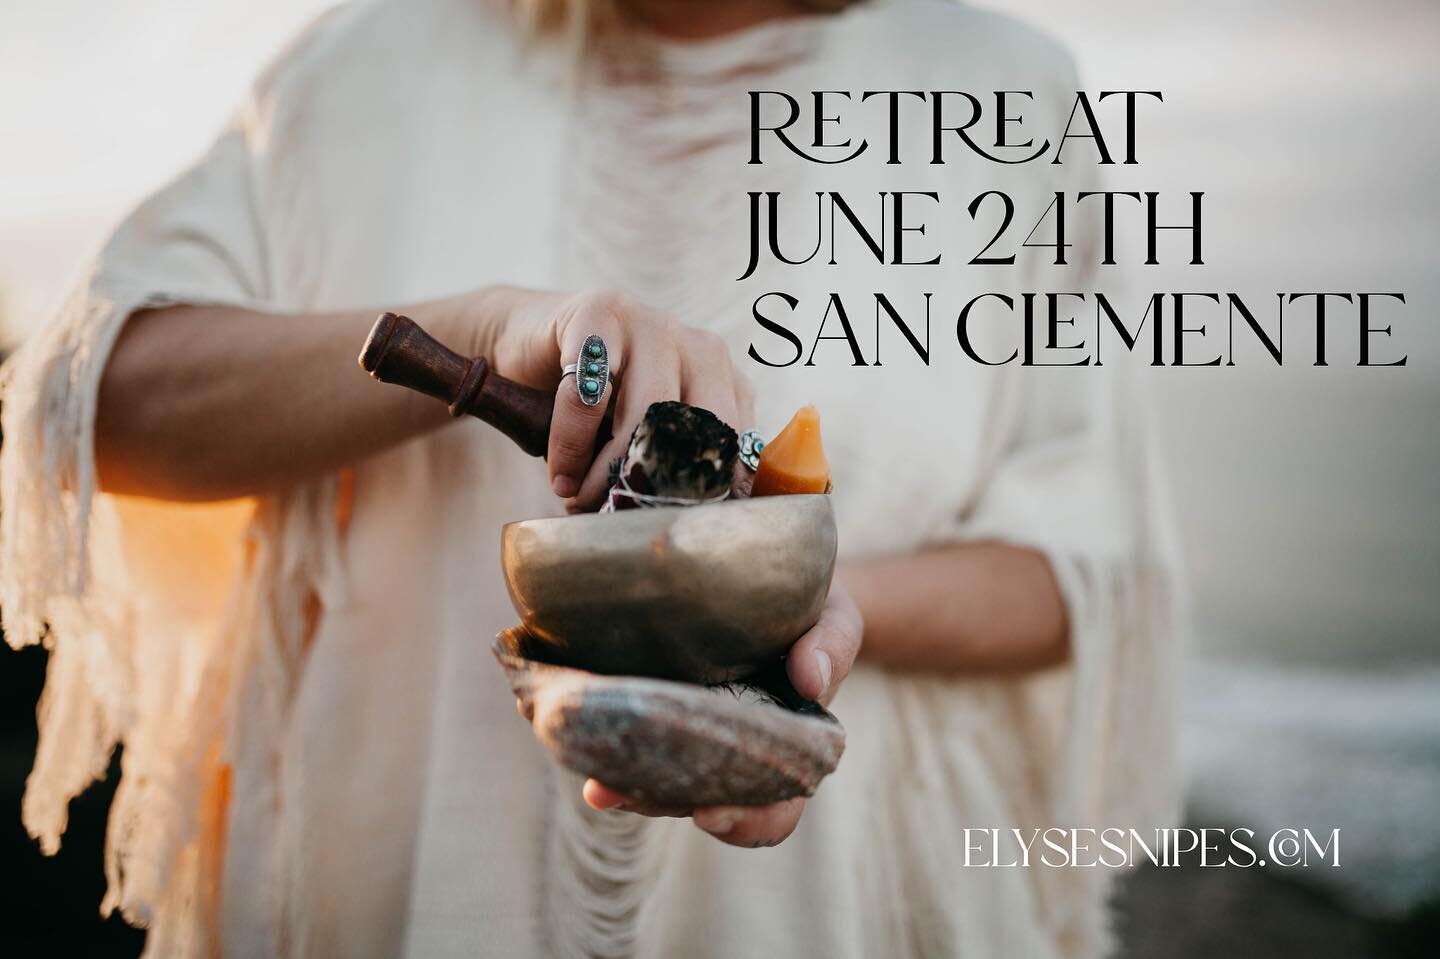 RETREAT ✨

An exploration of your story, patterns, core beliefs and deepest self. We will float between experiential therapeutic techniques, time in nature, expressive art, group process and ceremony. We start at inception and move our way through yo